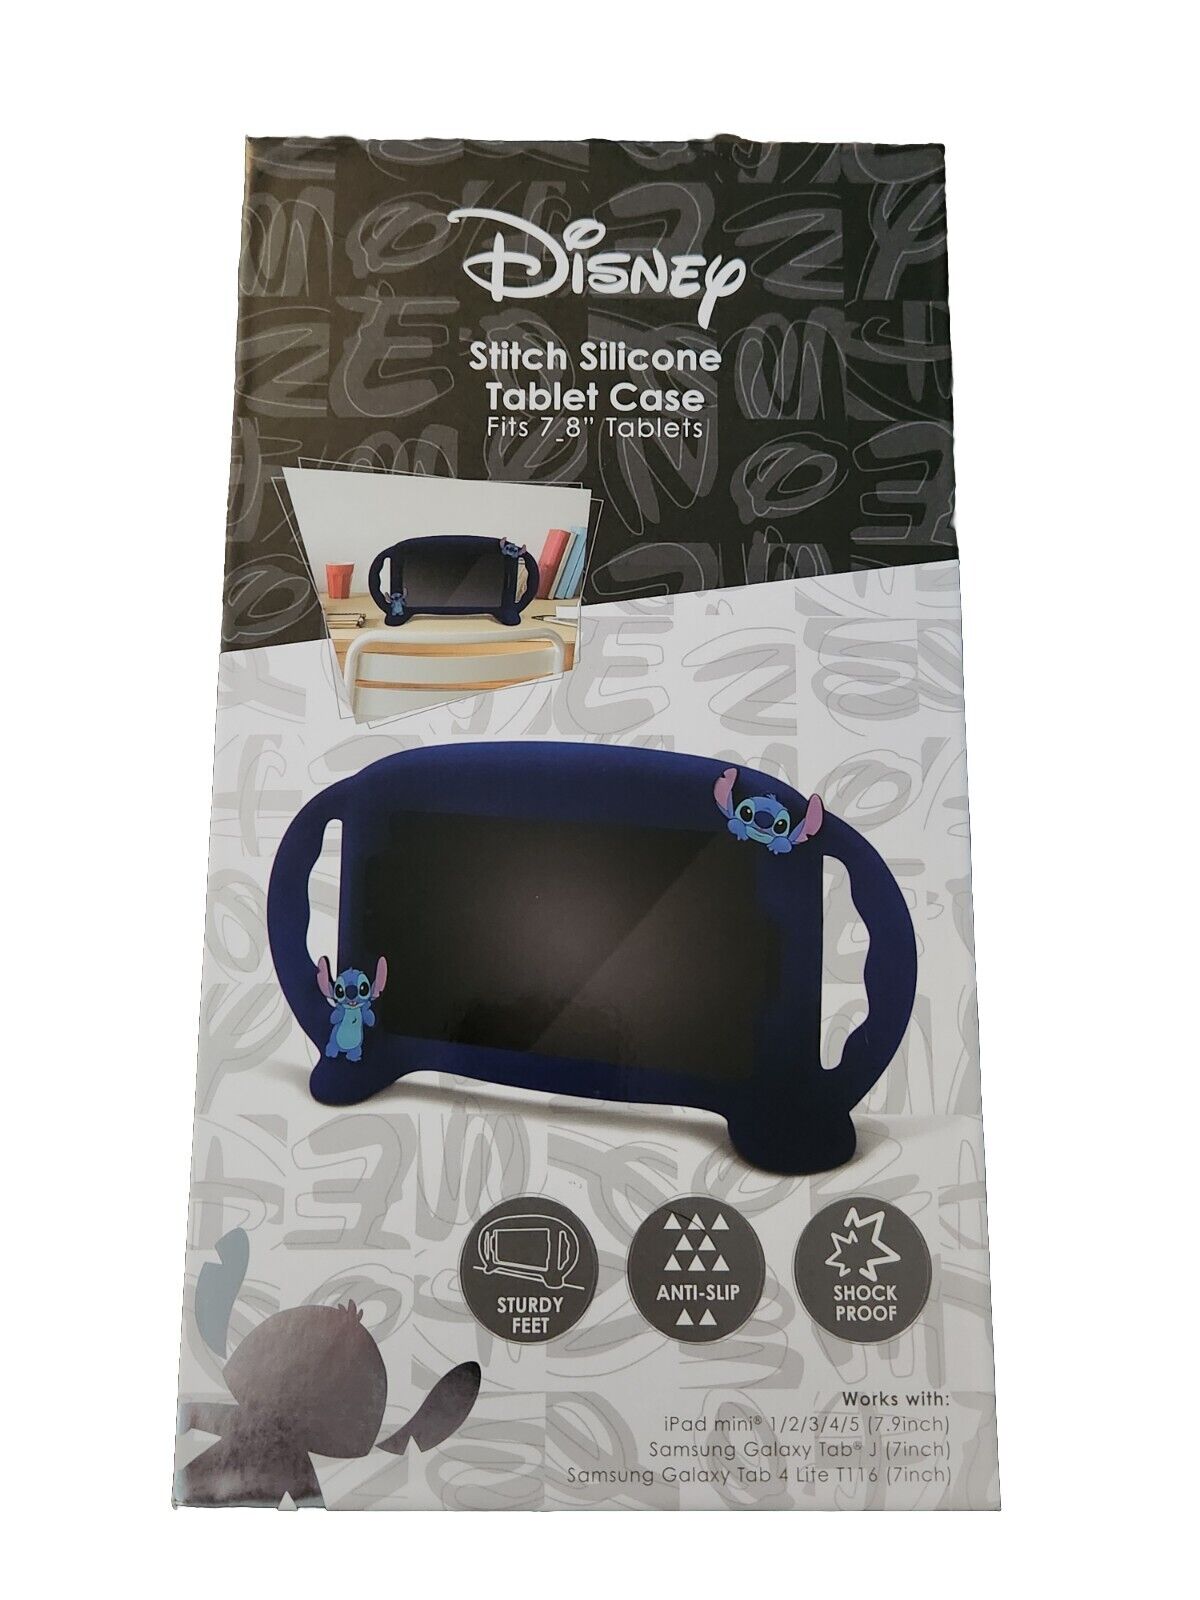 New Sealed Disney Stitch Silicone Tablet Case Fits 7-8” Tablet. iPad Mini